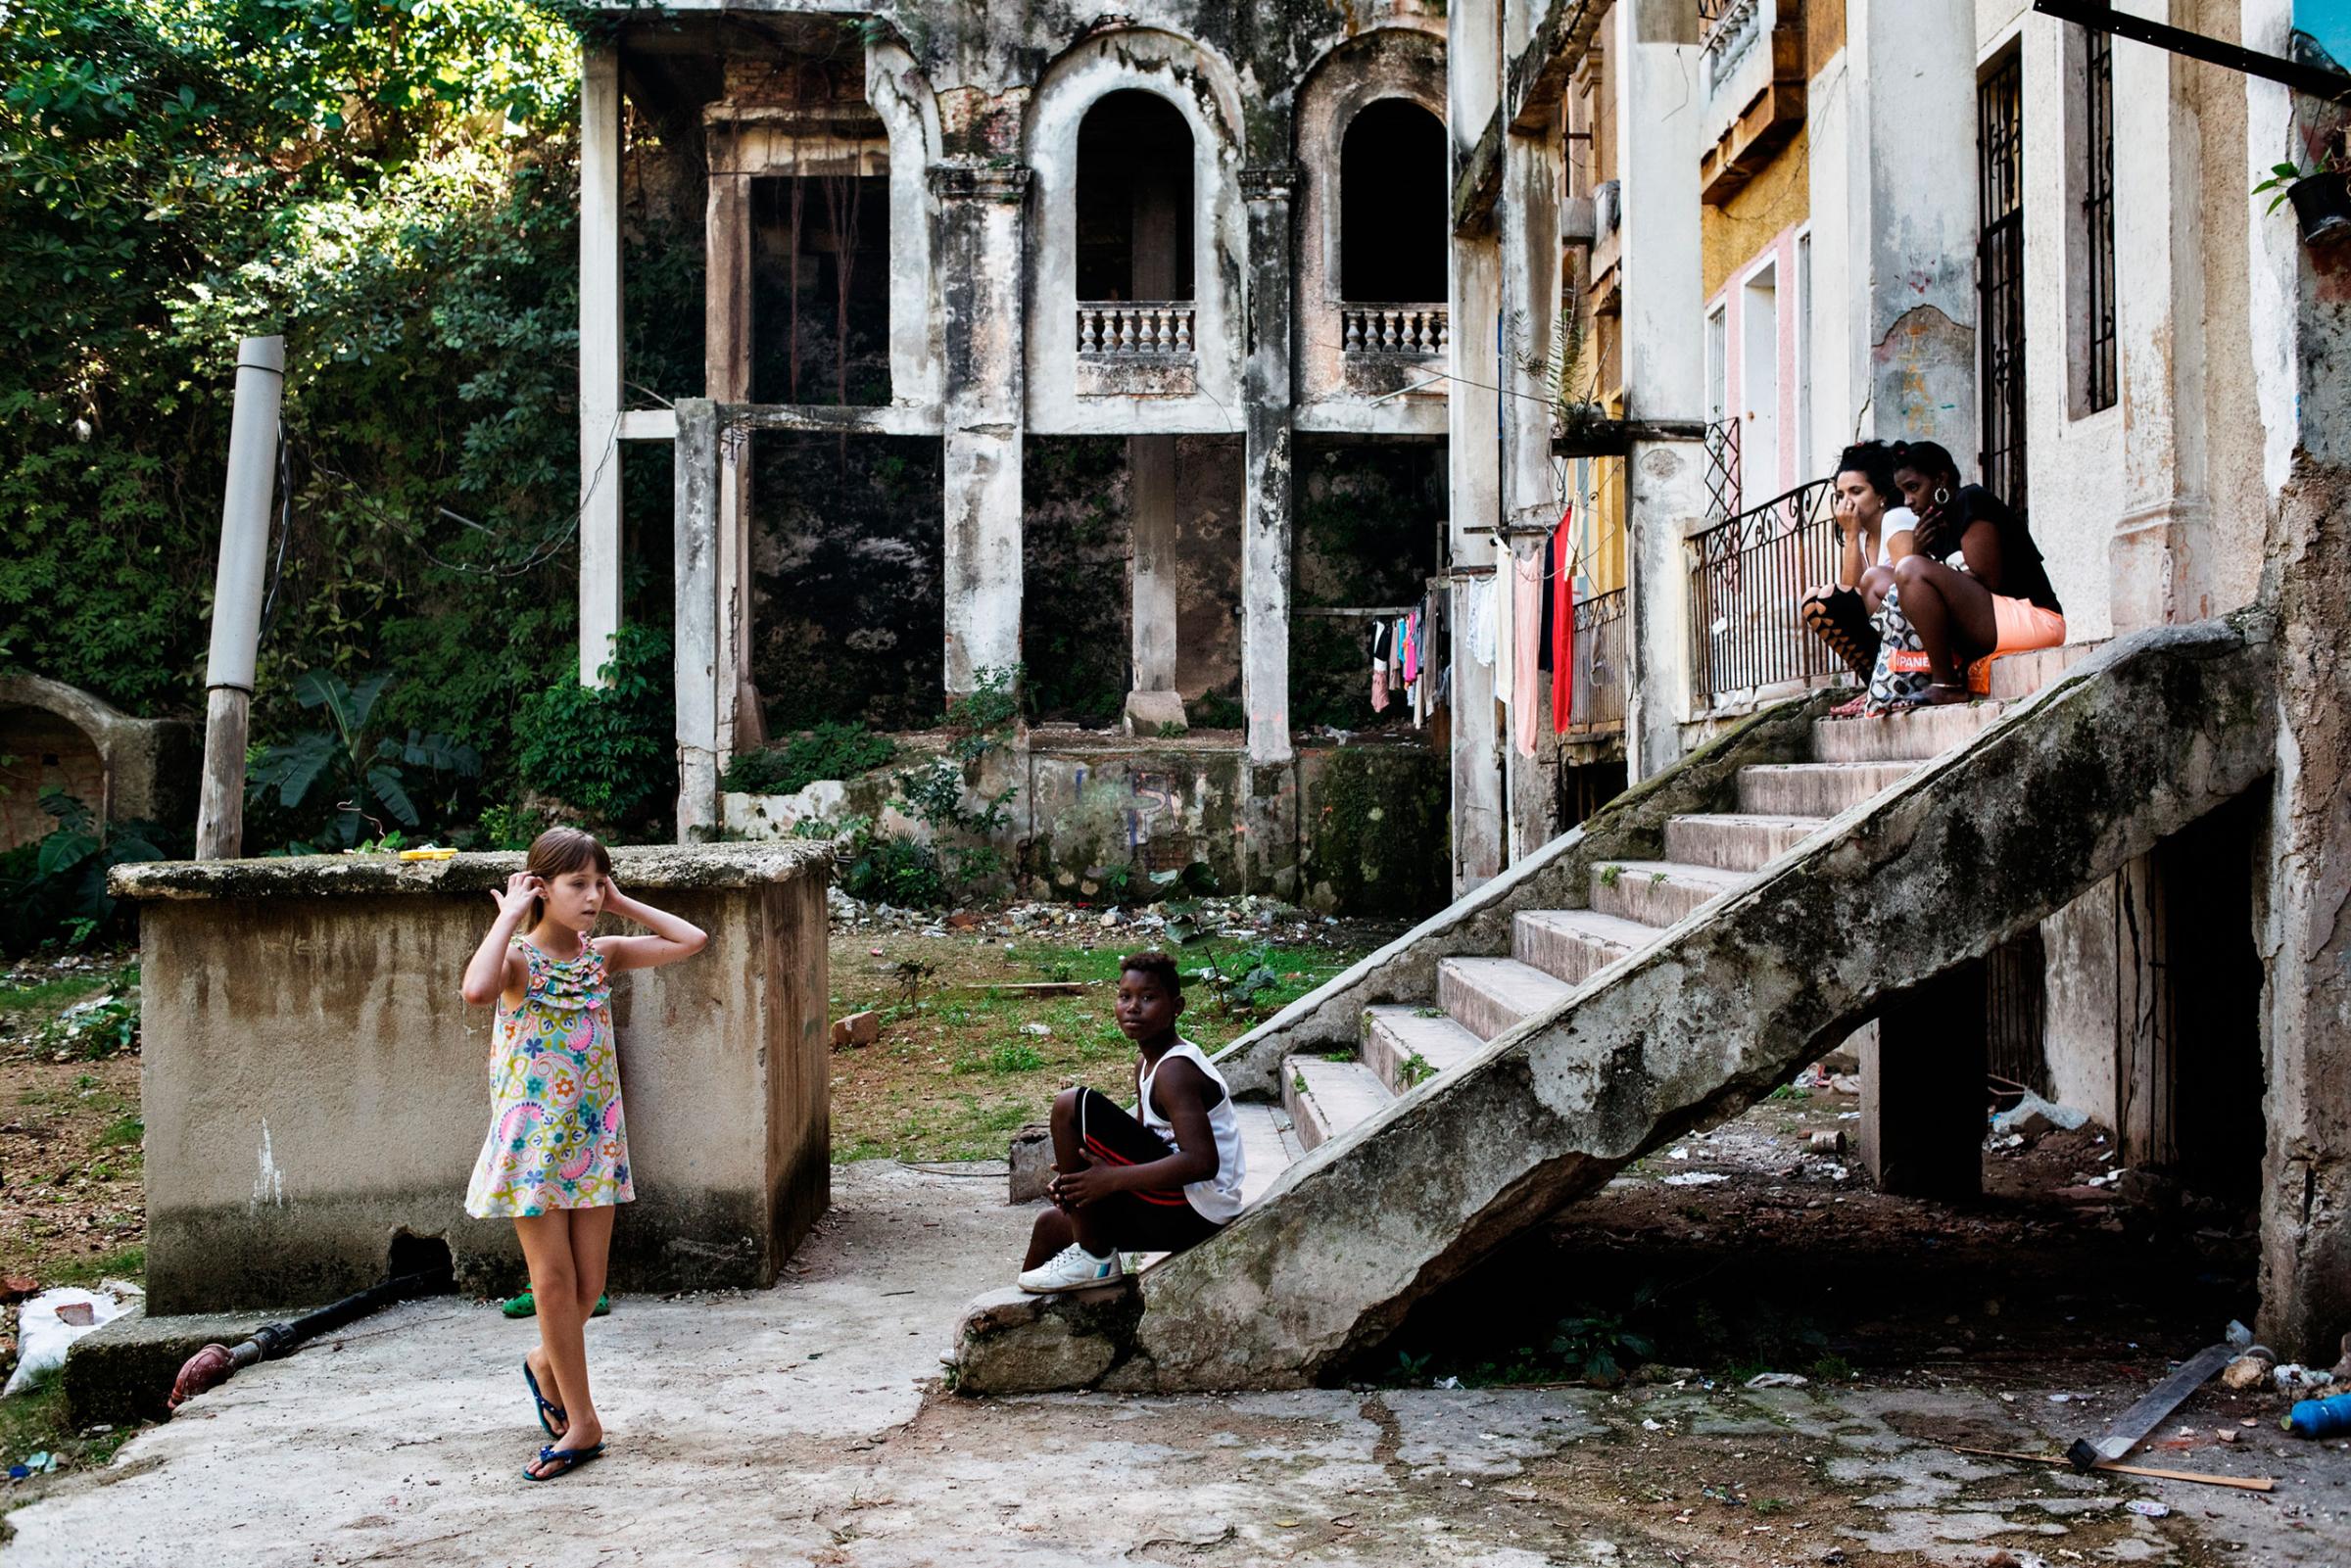 Young girls play on the grounds of the Arcos building, one of the most iconic buildings in the El Vedado neighborhood. Many old structures in Havana are crumbing and in need of repair, Dec. 2015. Yuri Kozyrev—NOOR for TIME